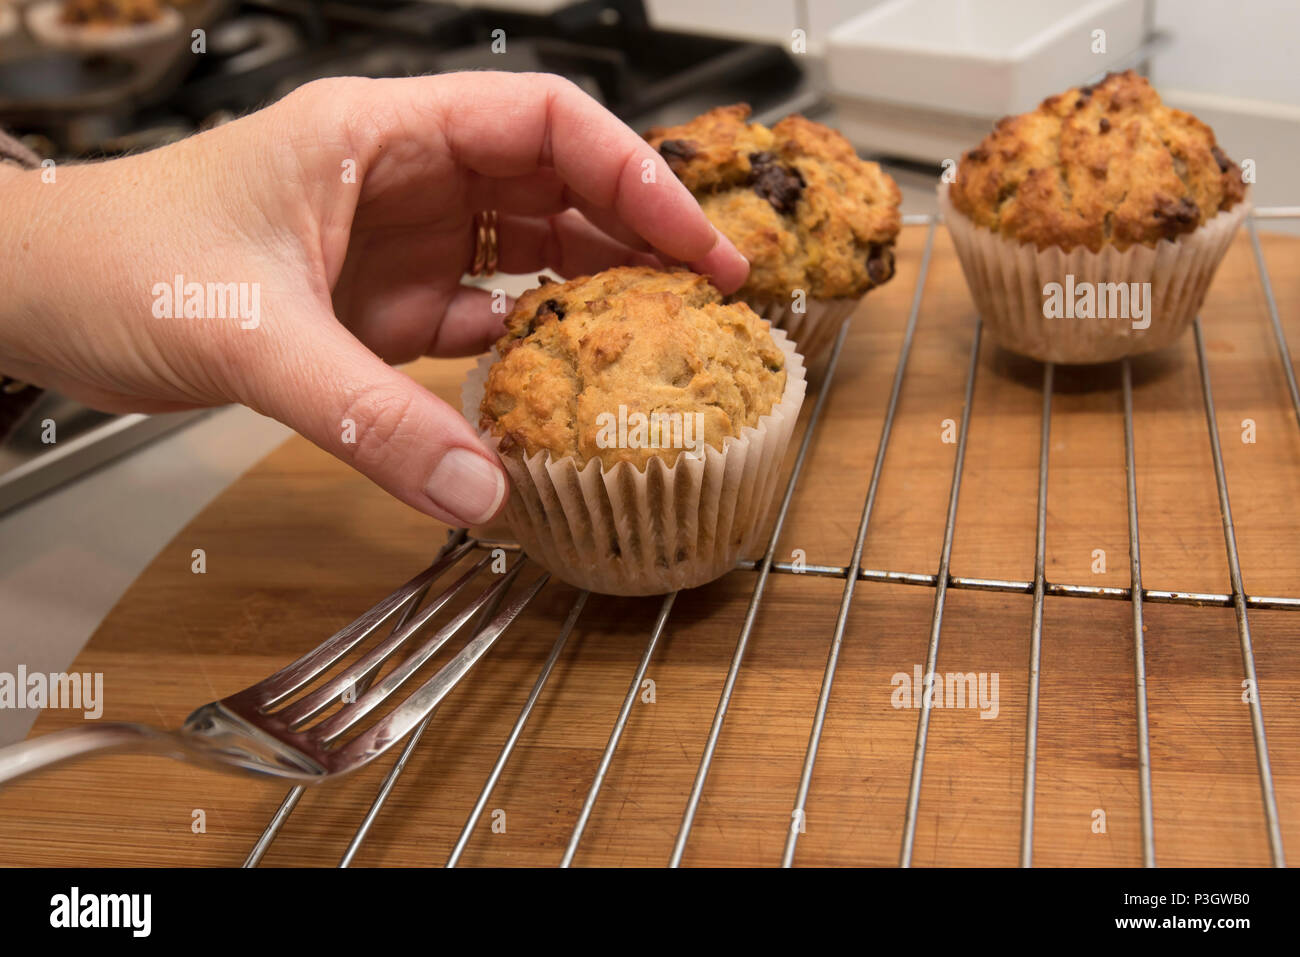 Home baked golden choc chip, banana and cereal muffins prepared in a kitchen in Sydney, Australia and cooling on a cake rack Stock Photo